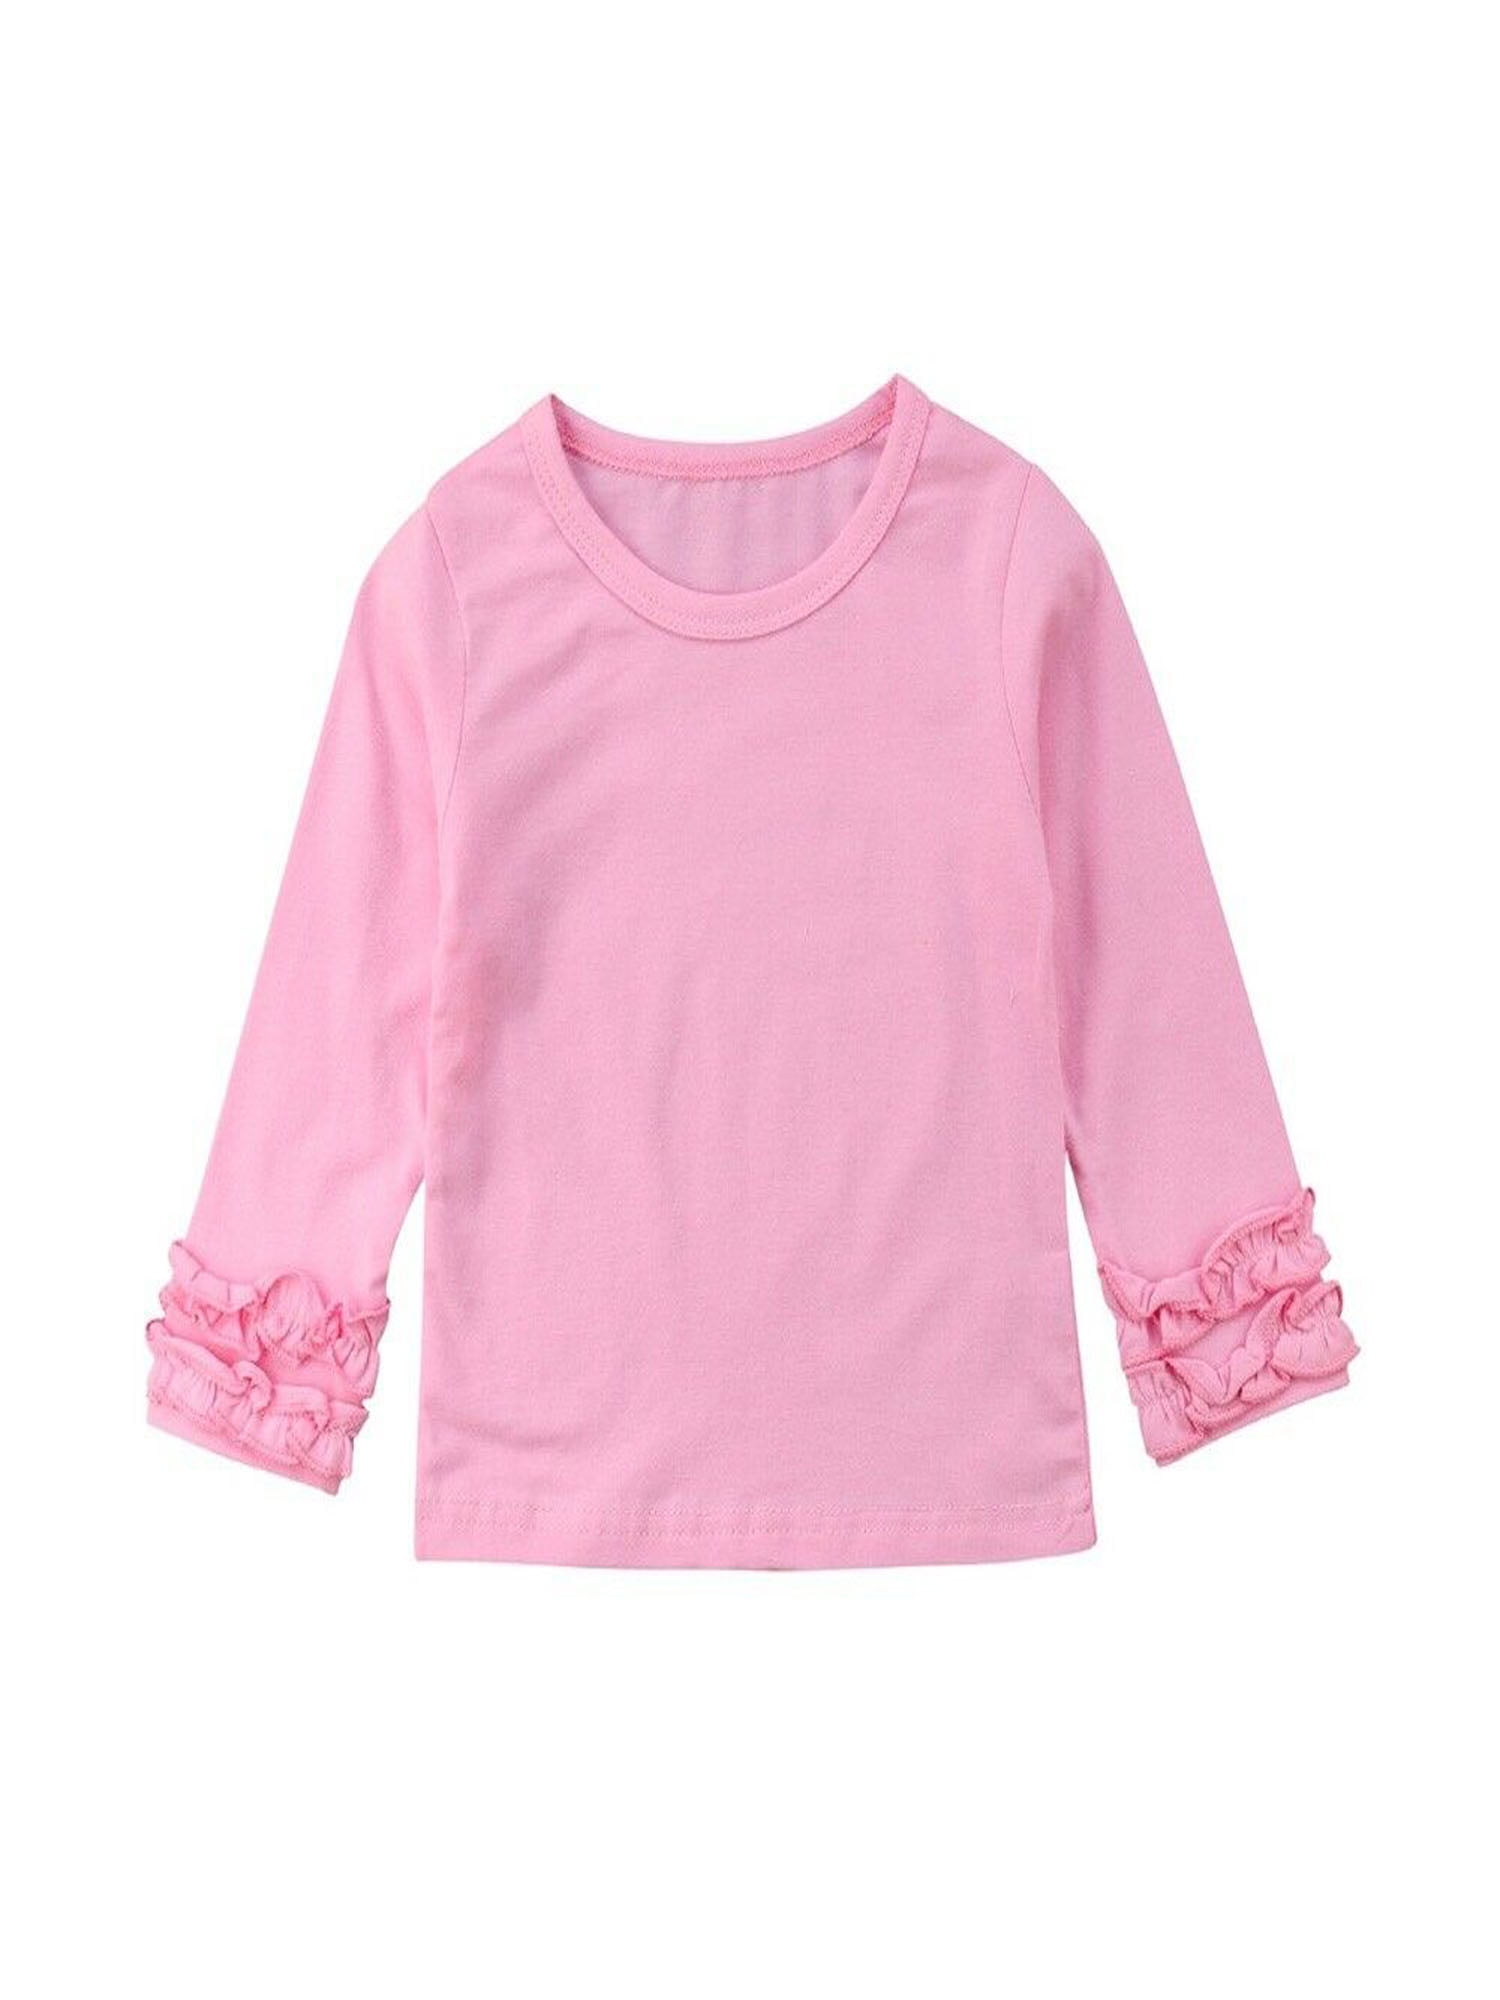 1-6 Years Baby Girl Lantern Sleeve Warm Round Neck Tops Shirts T-Shirt Clothes Tee